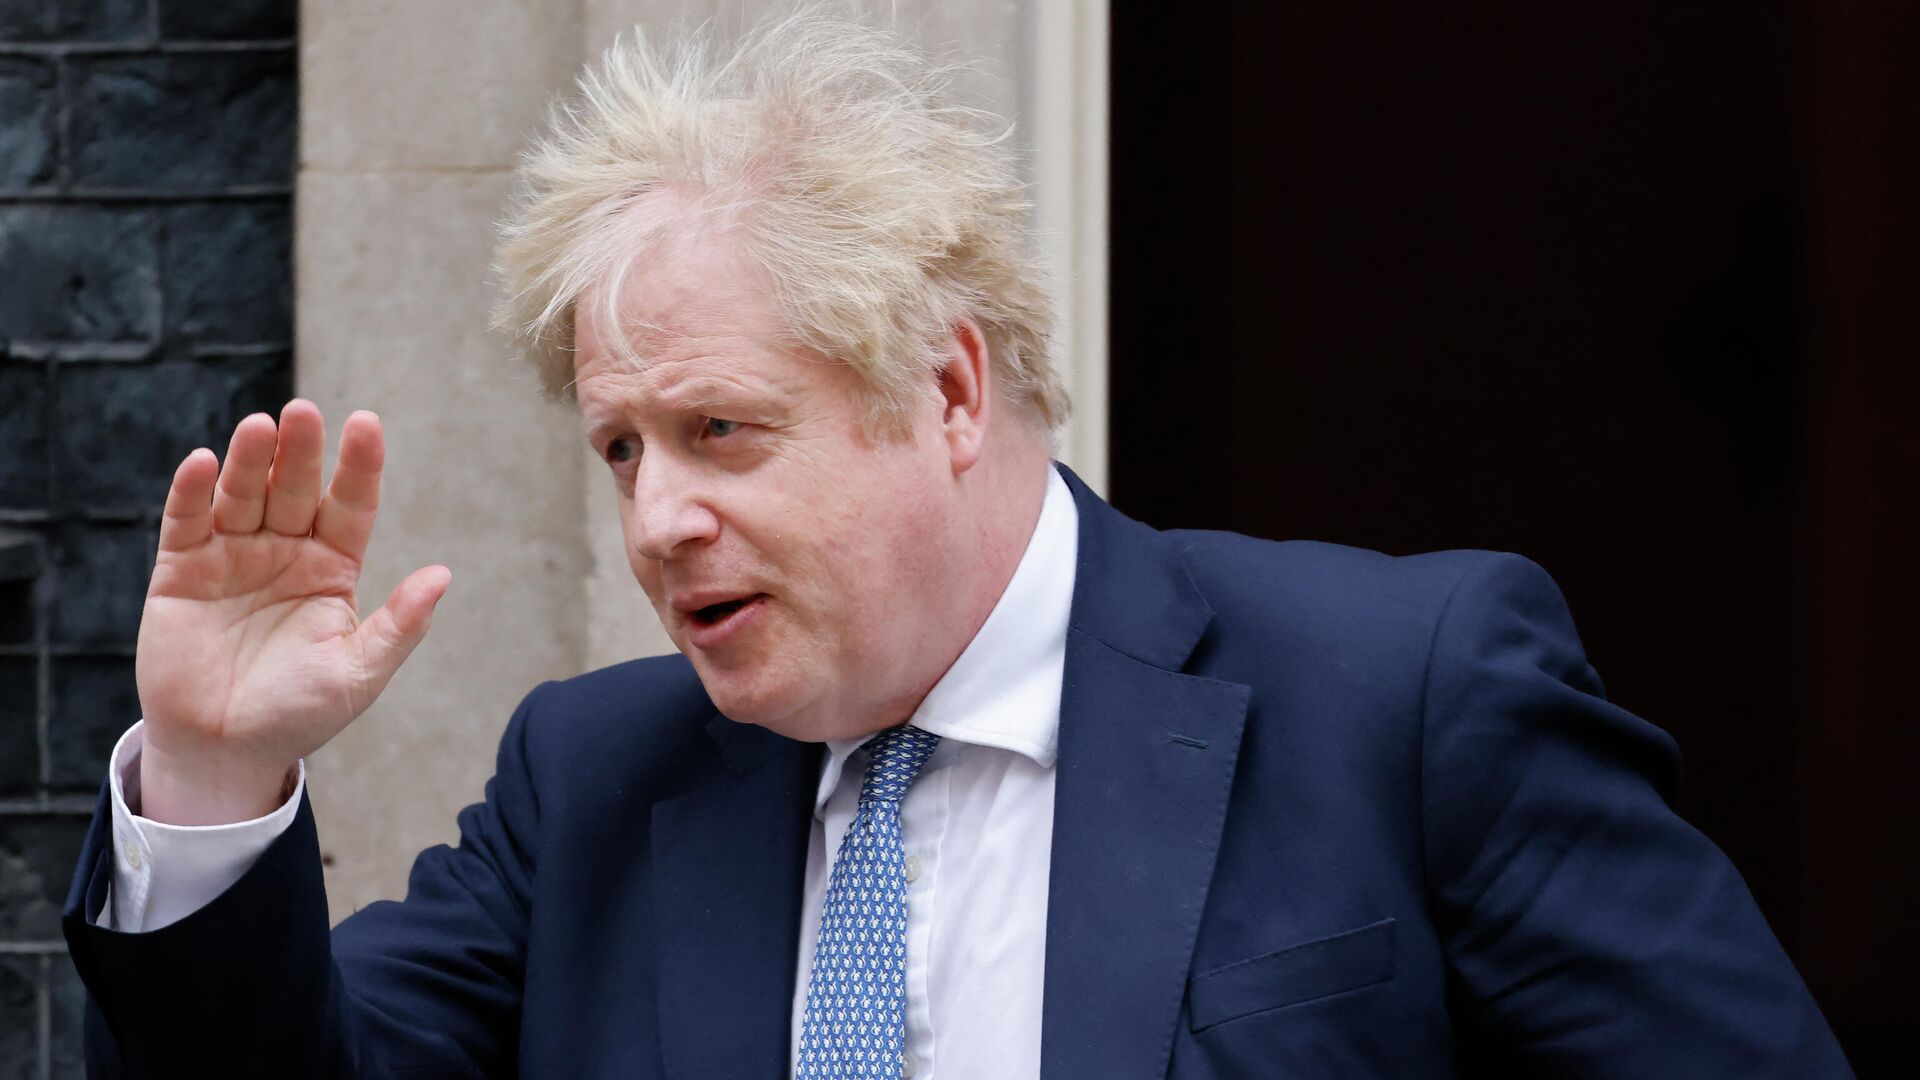 Britain's Prime Minister Boris Johnson waves as he leaves from 10 Downing Street in central London on February 2, 2022 to take part in the weekly session of Prime Minister's Questions (PMQs) at the House of Commons. - Sputnik International, 1920, 02.02.2022